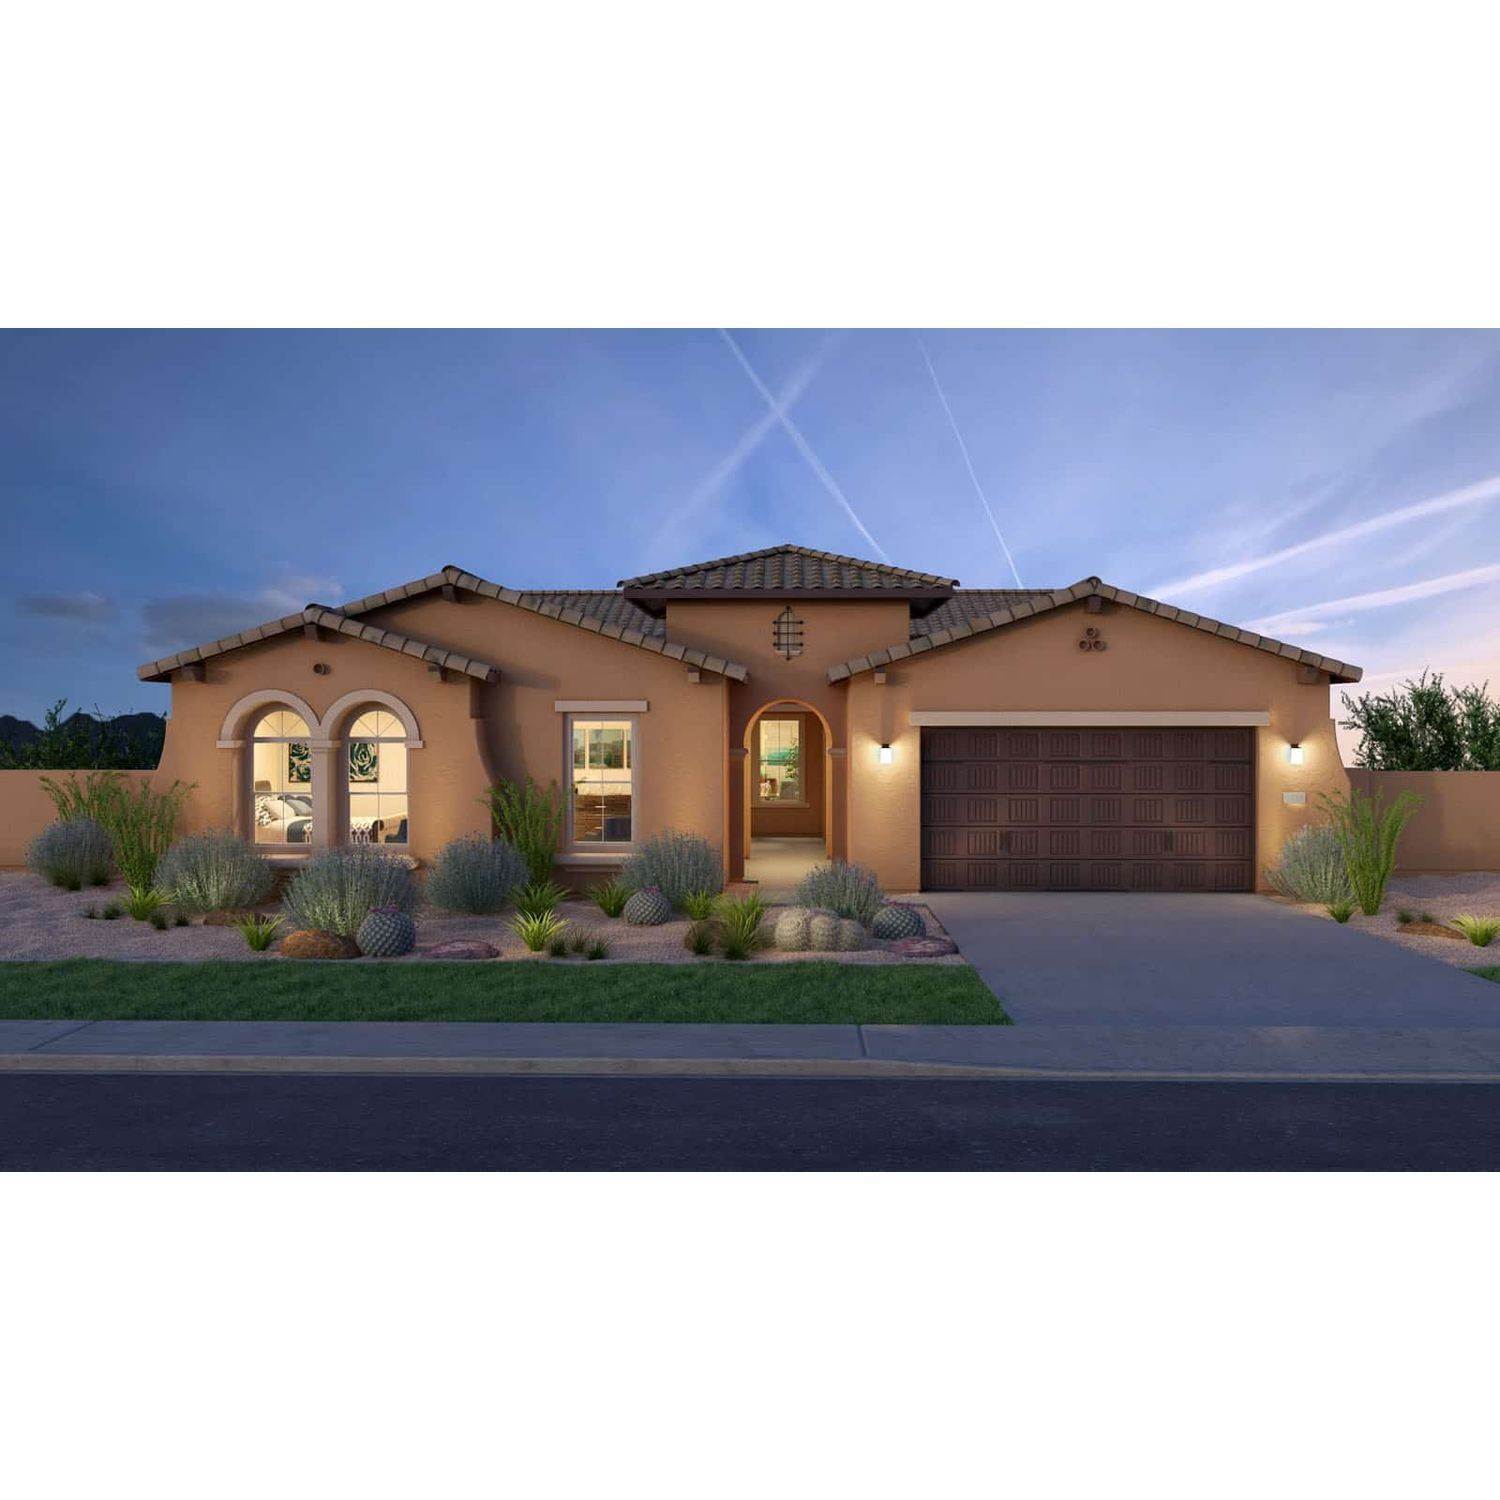 Single Family for Sale at Preserve At Sedella 18118 W Highland Ave., Goodyear, AZ 85395